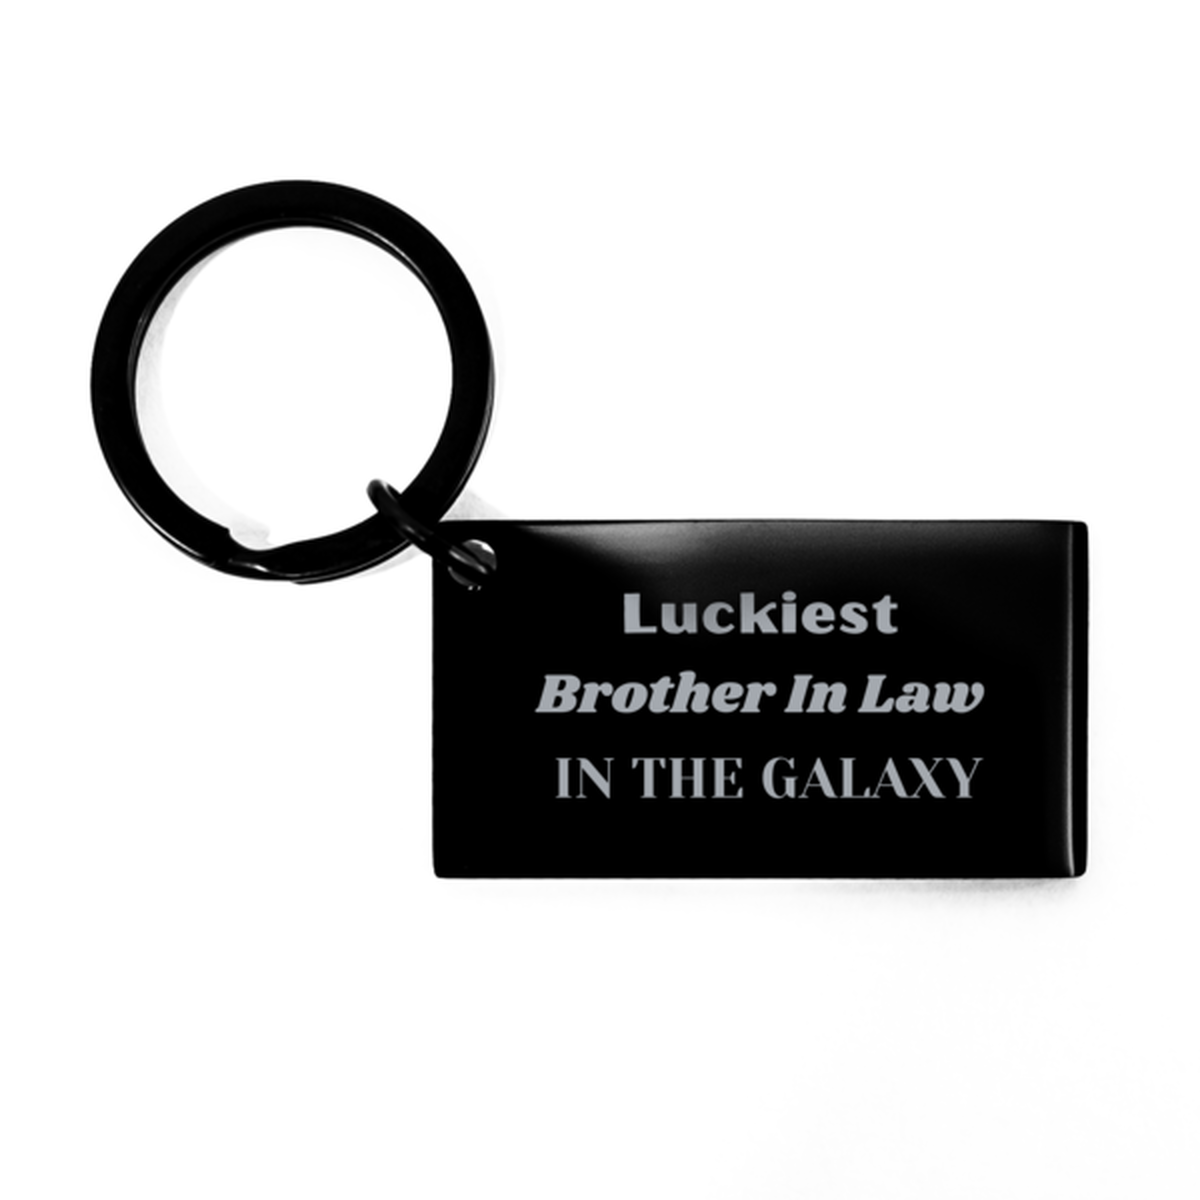 Luckiest Brother In Law in the Galaxy, To My Brother In Law Engraved Gifts, Christmas Brother In Law Keychain Gifts, X-mas Birthday Unique Gifts For Brother In Law Men Women